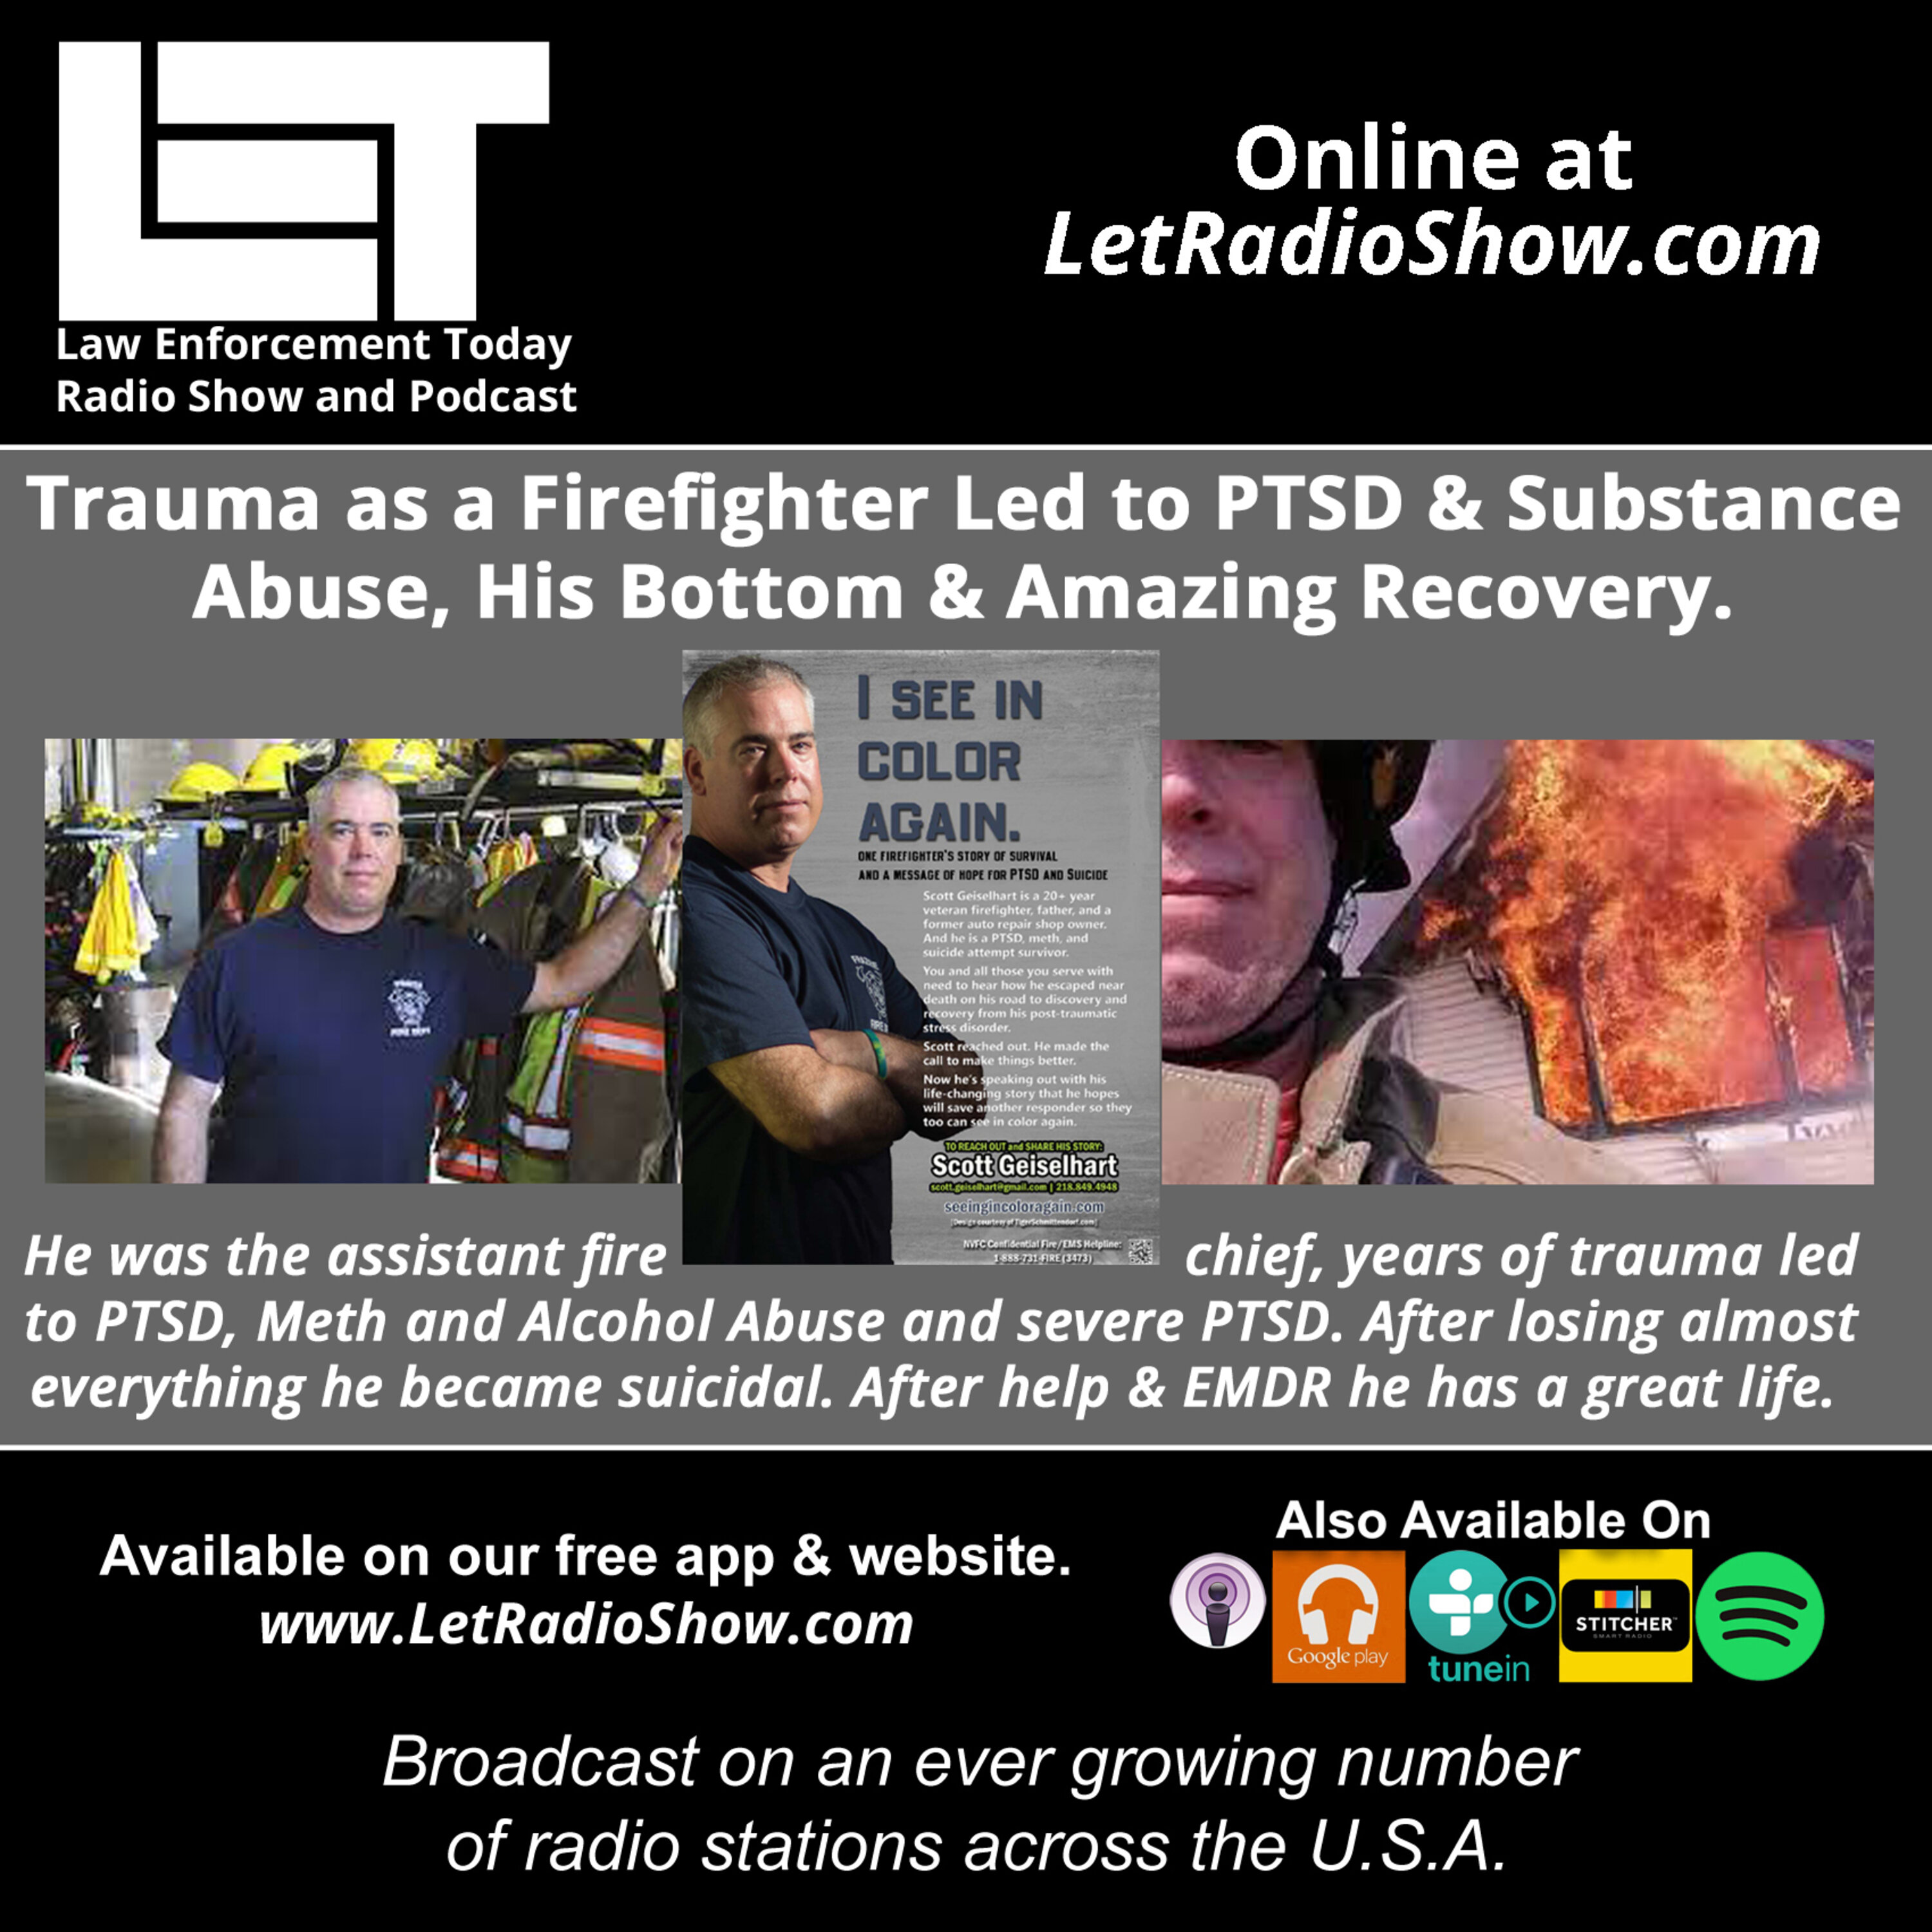 S6E26: Jaws of Life and Cold Water Rescues Took A Heavy Toll. His Frightening Bottom & Amazing Recovery.